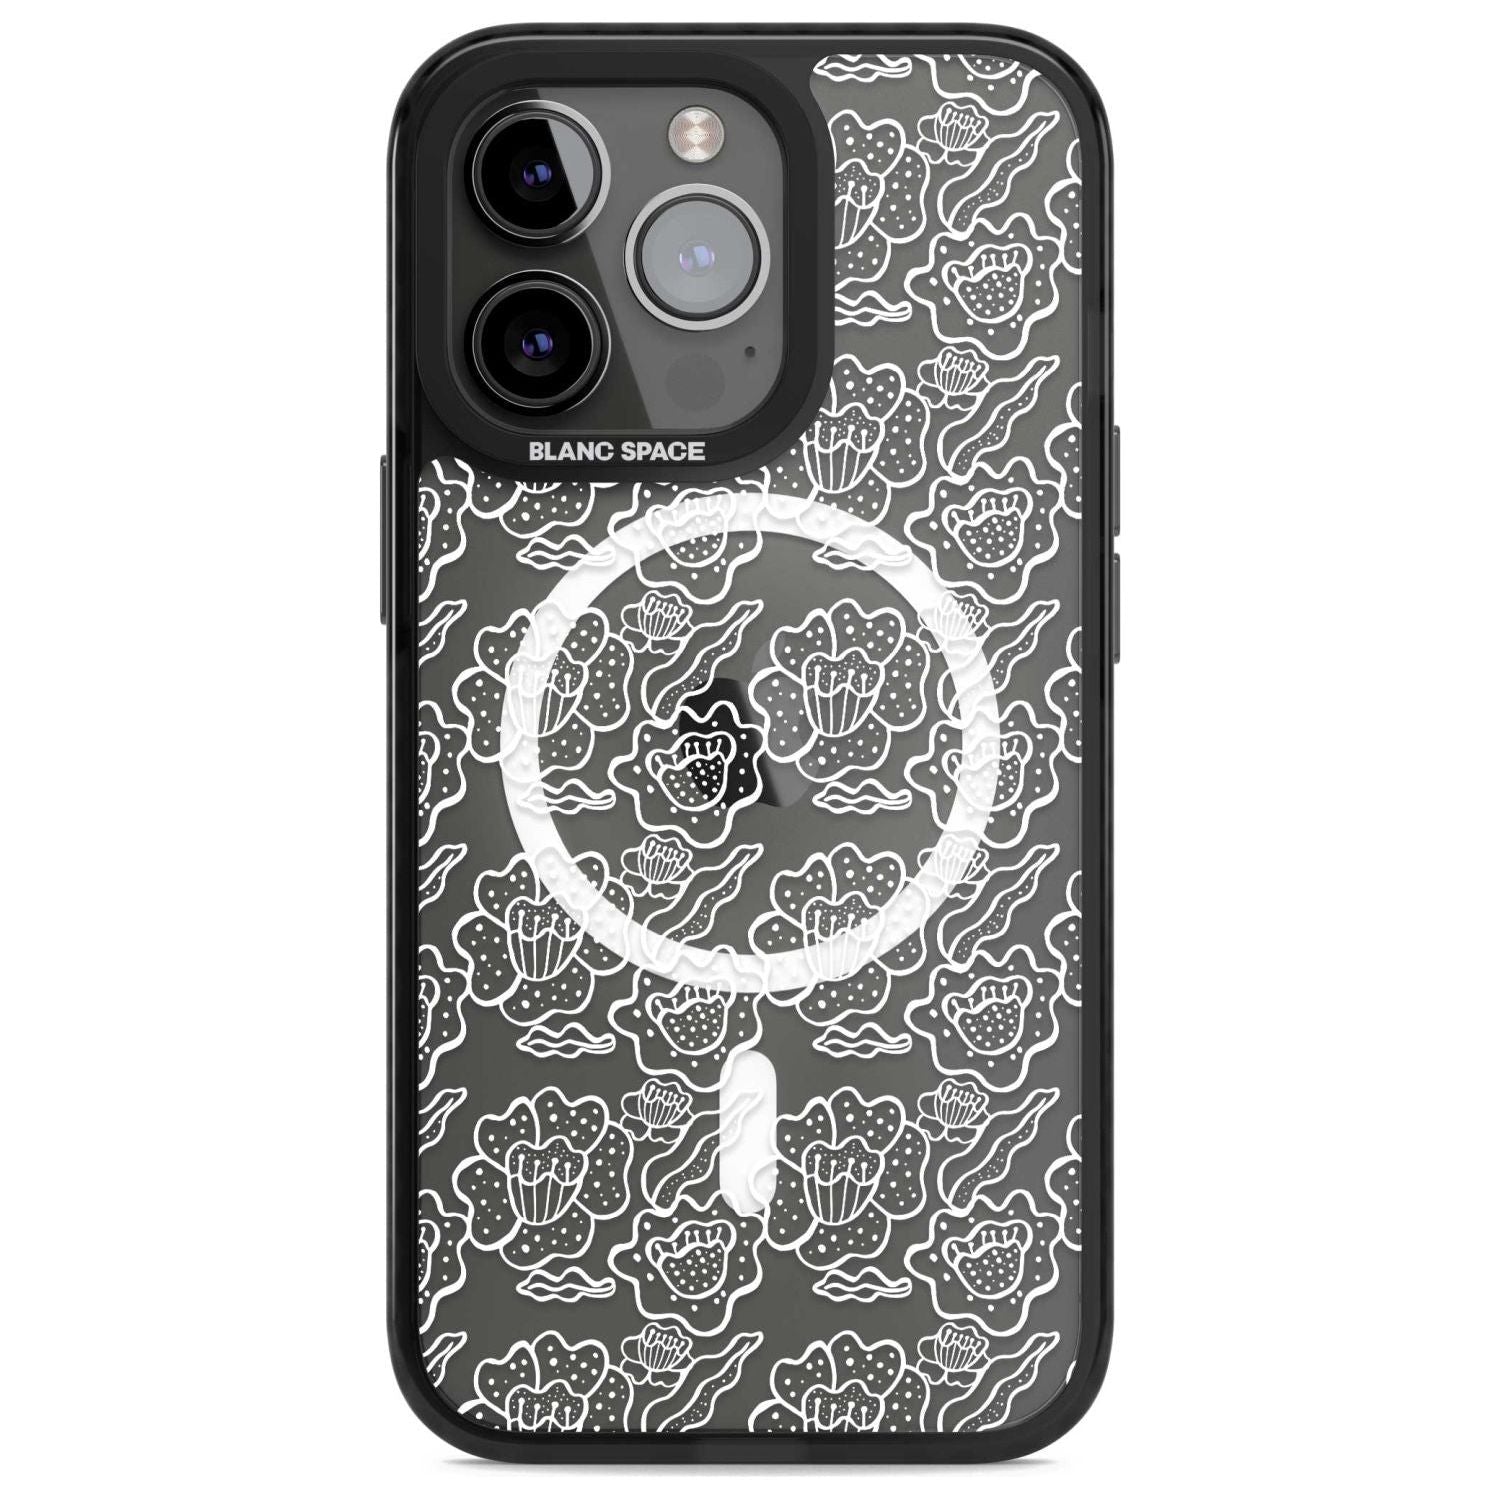 Funky Floral Patterns White on Clear Phone Case iPhone 15 Pro Max / Magsafe Black Impact Case,iPhone 15 Pro / Magsafe Black Impact Case,iPhone 14 Pro Max / Magsafe Black Impact Case,iPhone 14 Pro / Magsafe Black Impact Case,iPhone 13 Pro / Magsafe Black Impact Case Blanc Space